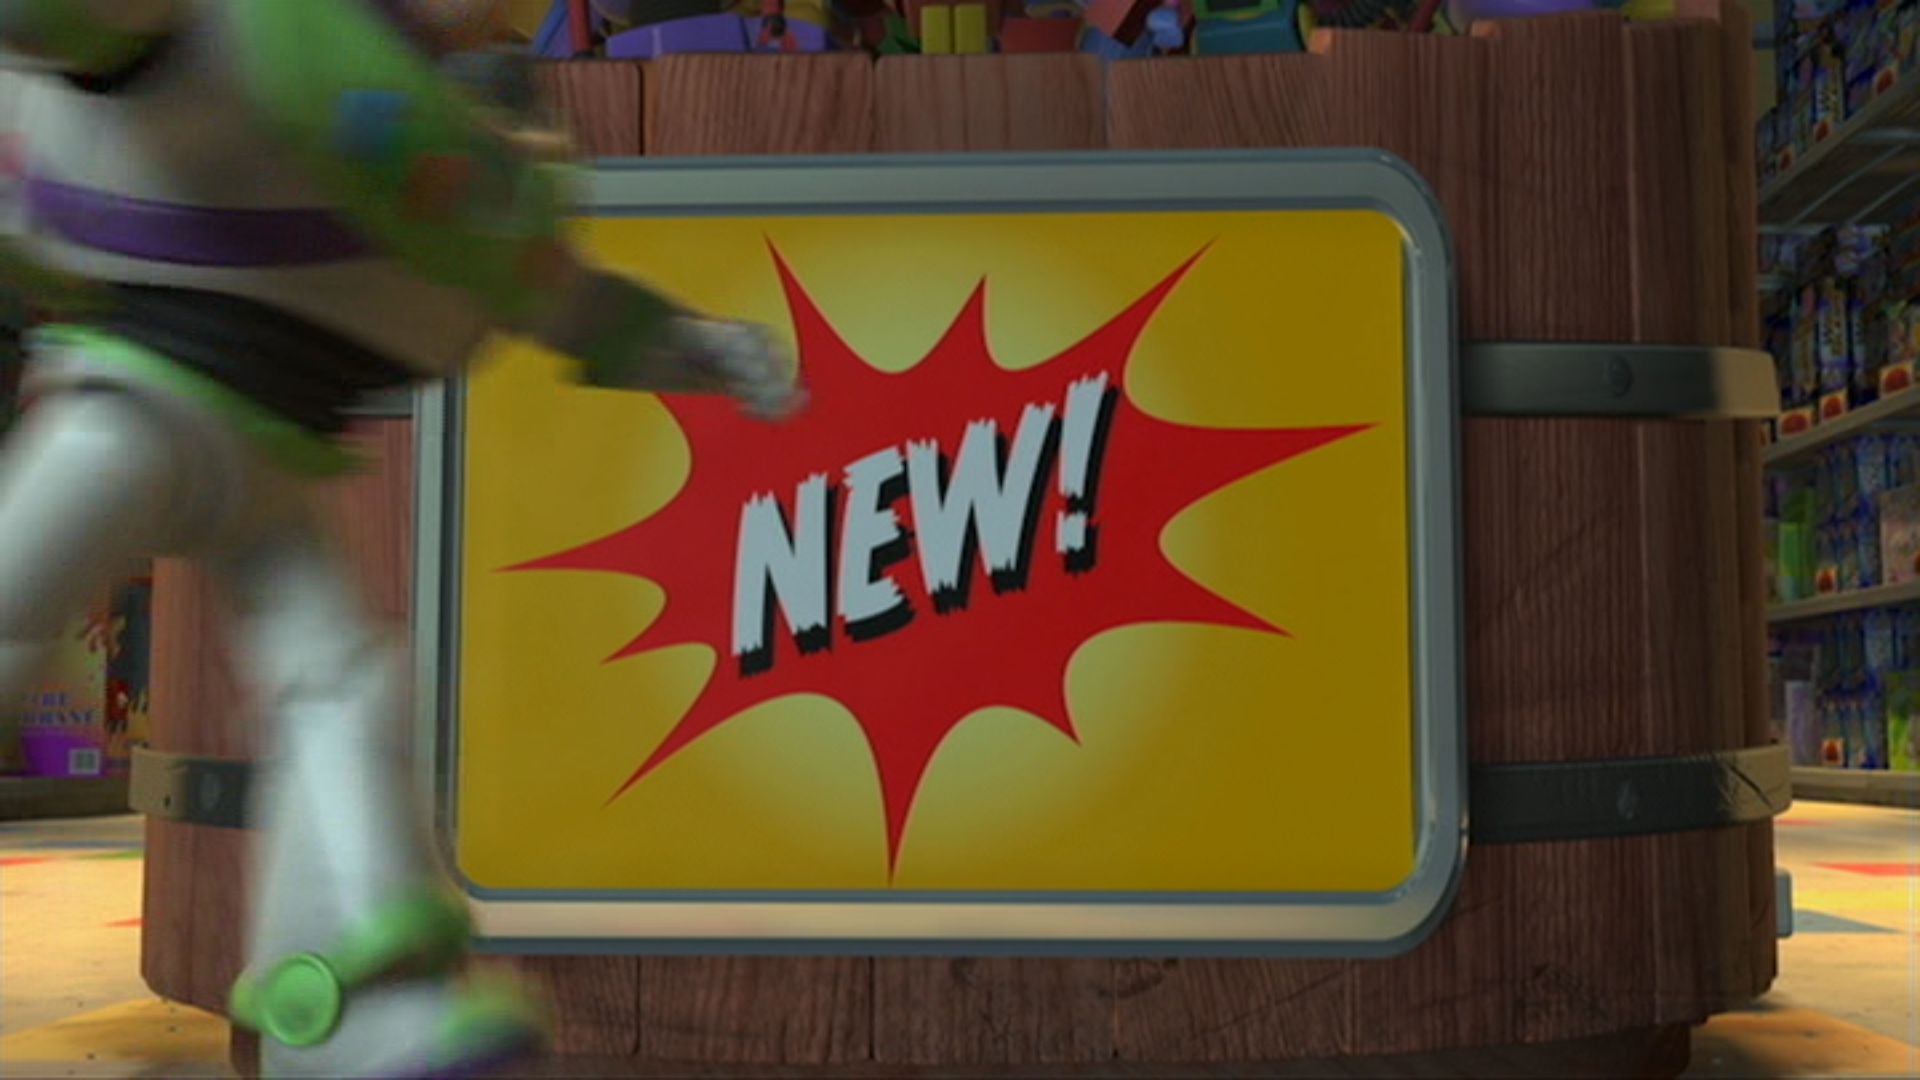 Al S Toy Barn In Toy Story 2 Fonts In Use